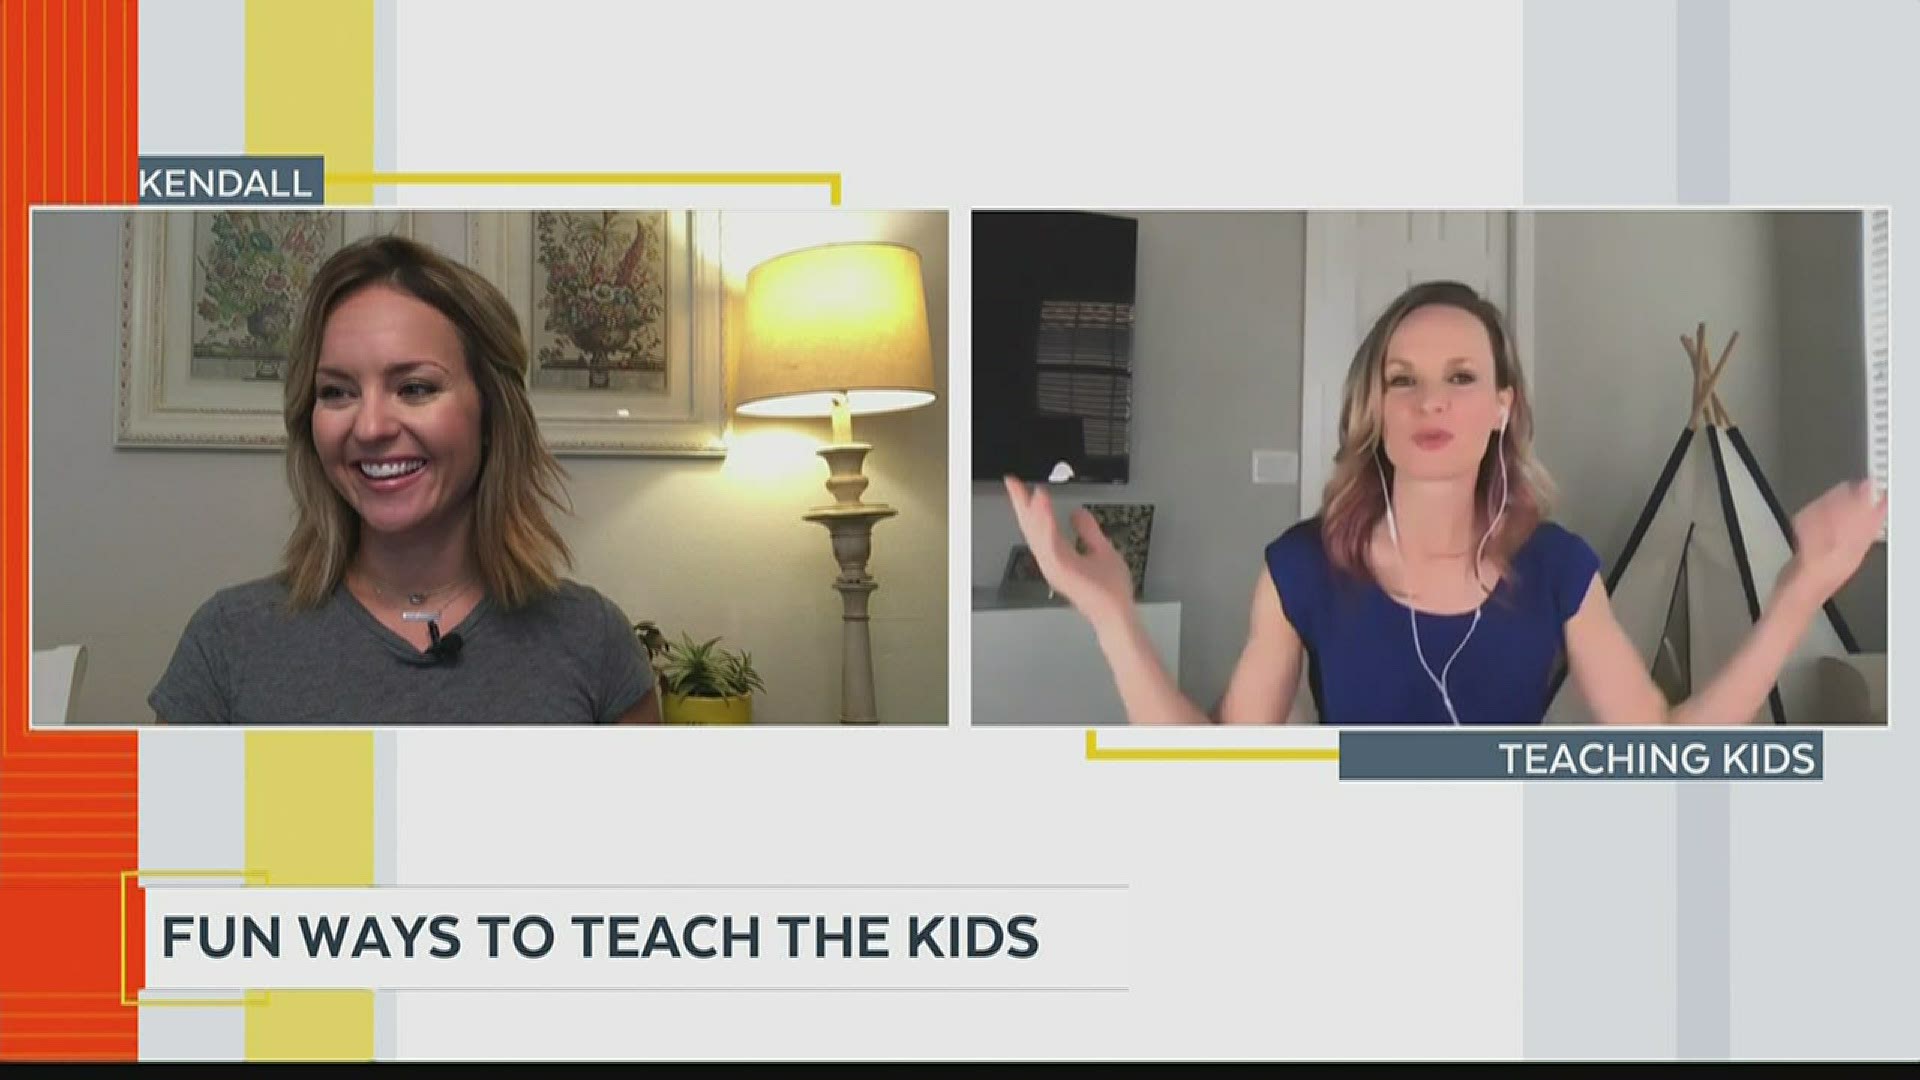 Laura Byrne from “Tampa Bay Parenting Magazine” joined GDL via Zoom to share her tips for how to make teaching the kids from home fun and memorable.